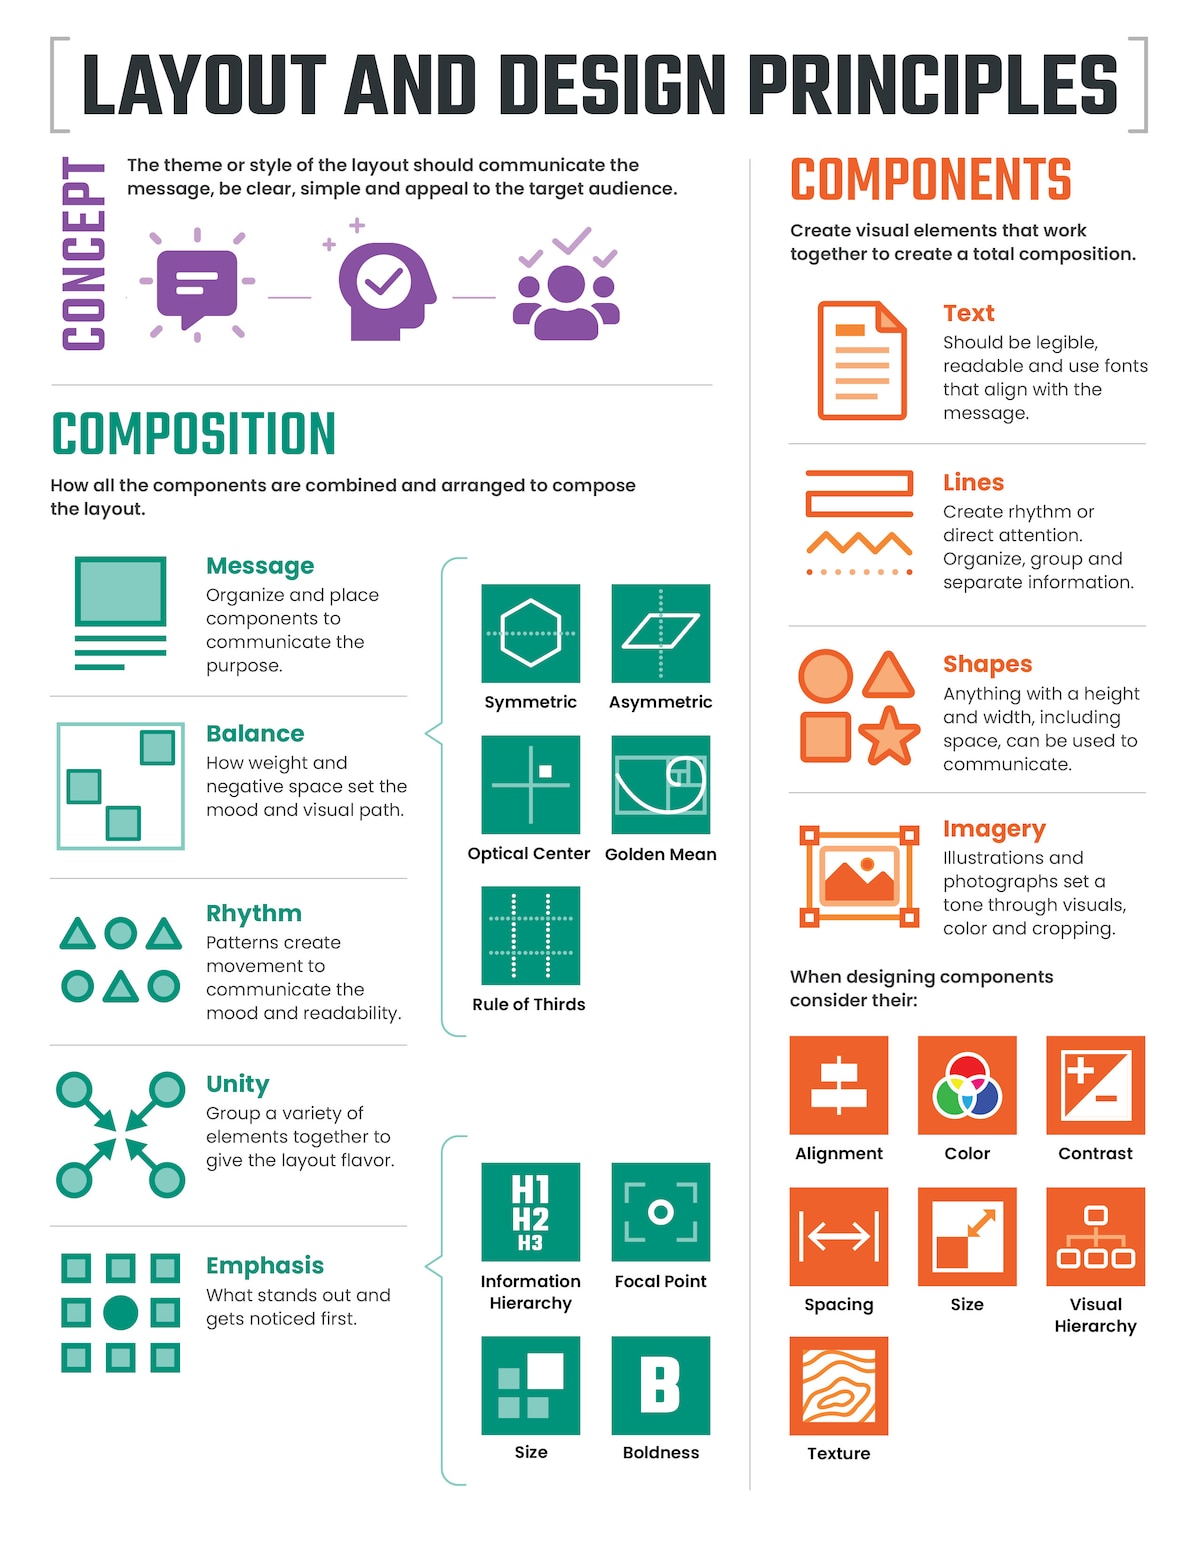 This infographic is a design cheat sheet to enhance your understanding of the details that make up the three C's of layout: Composition, Components and Concept.